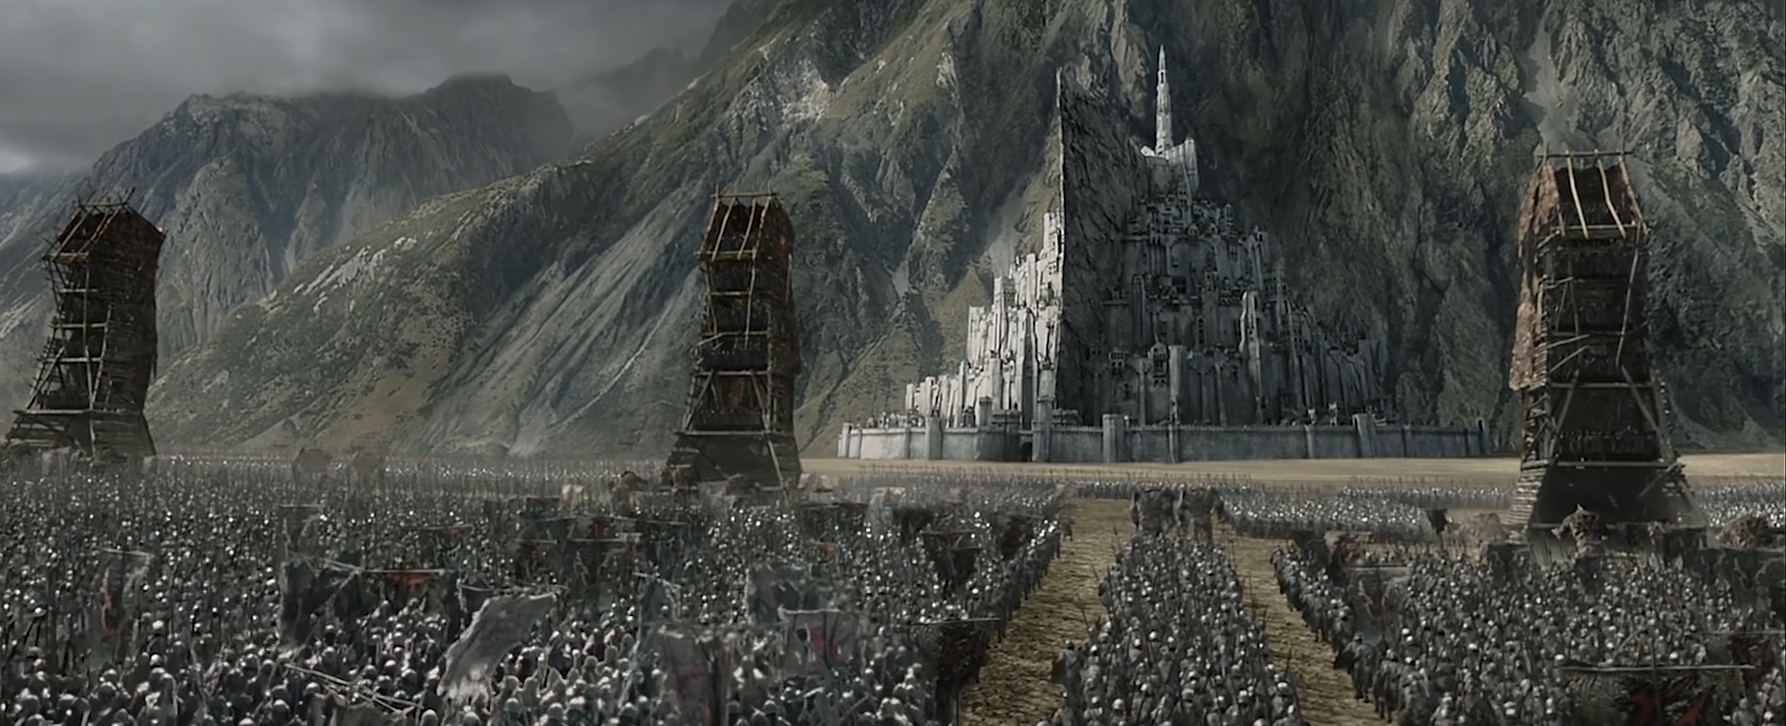 Citadel of Gondor, The One Wiki to Rule Them All